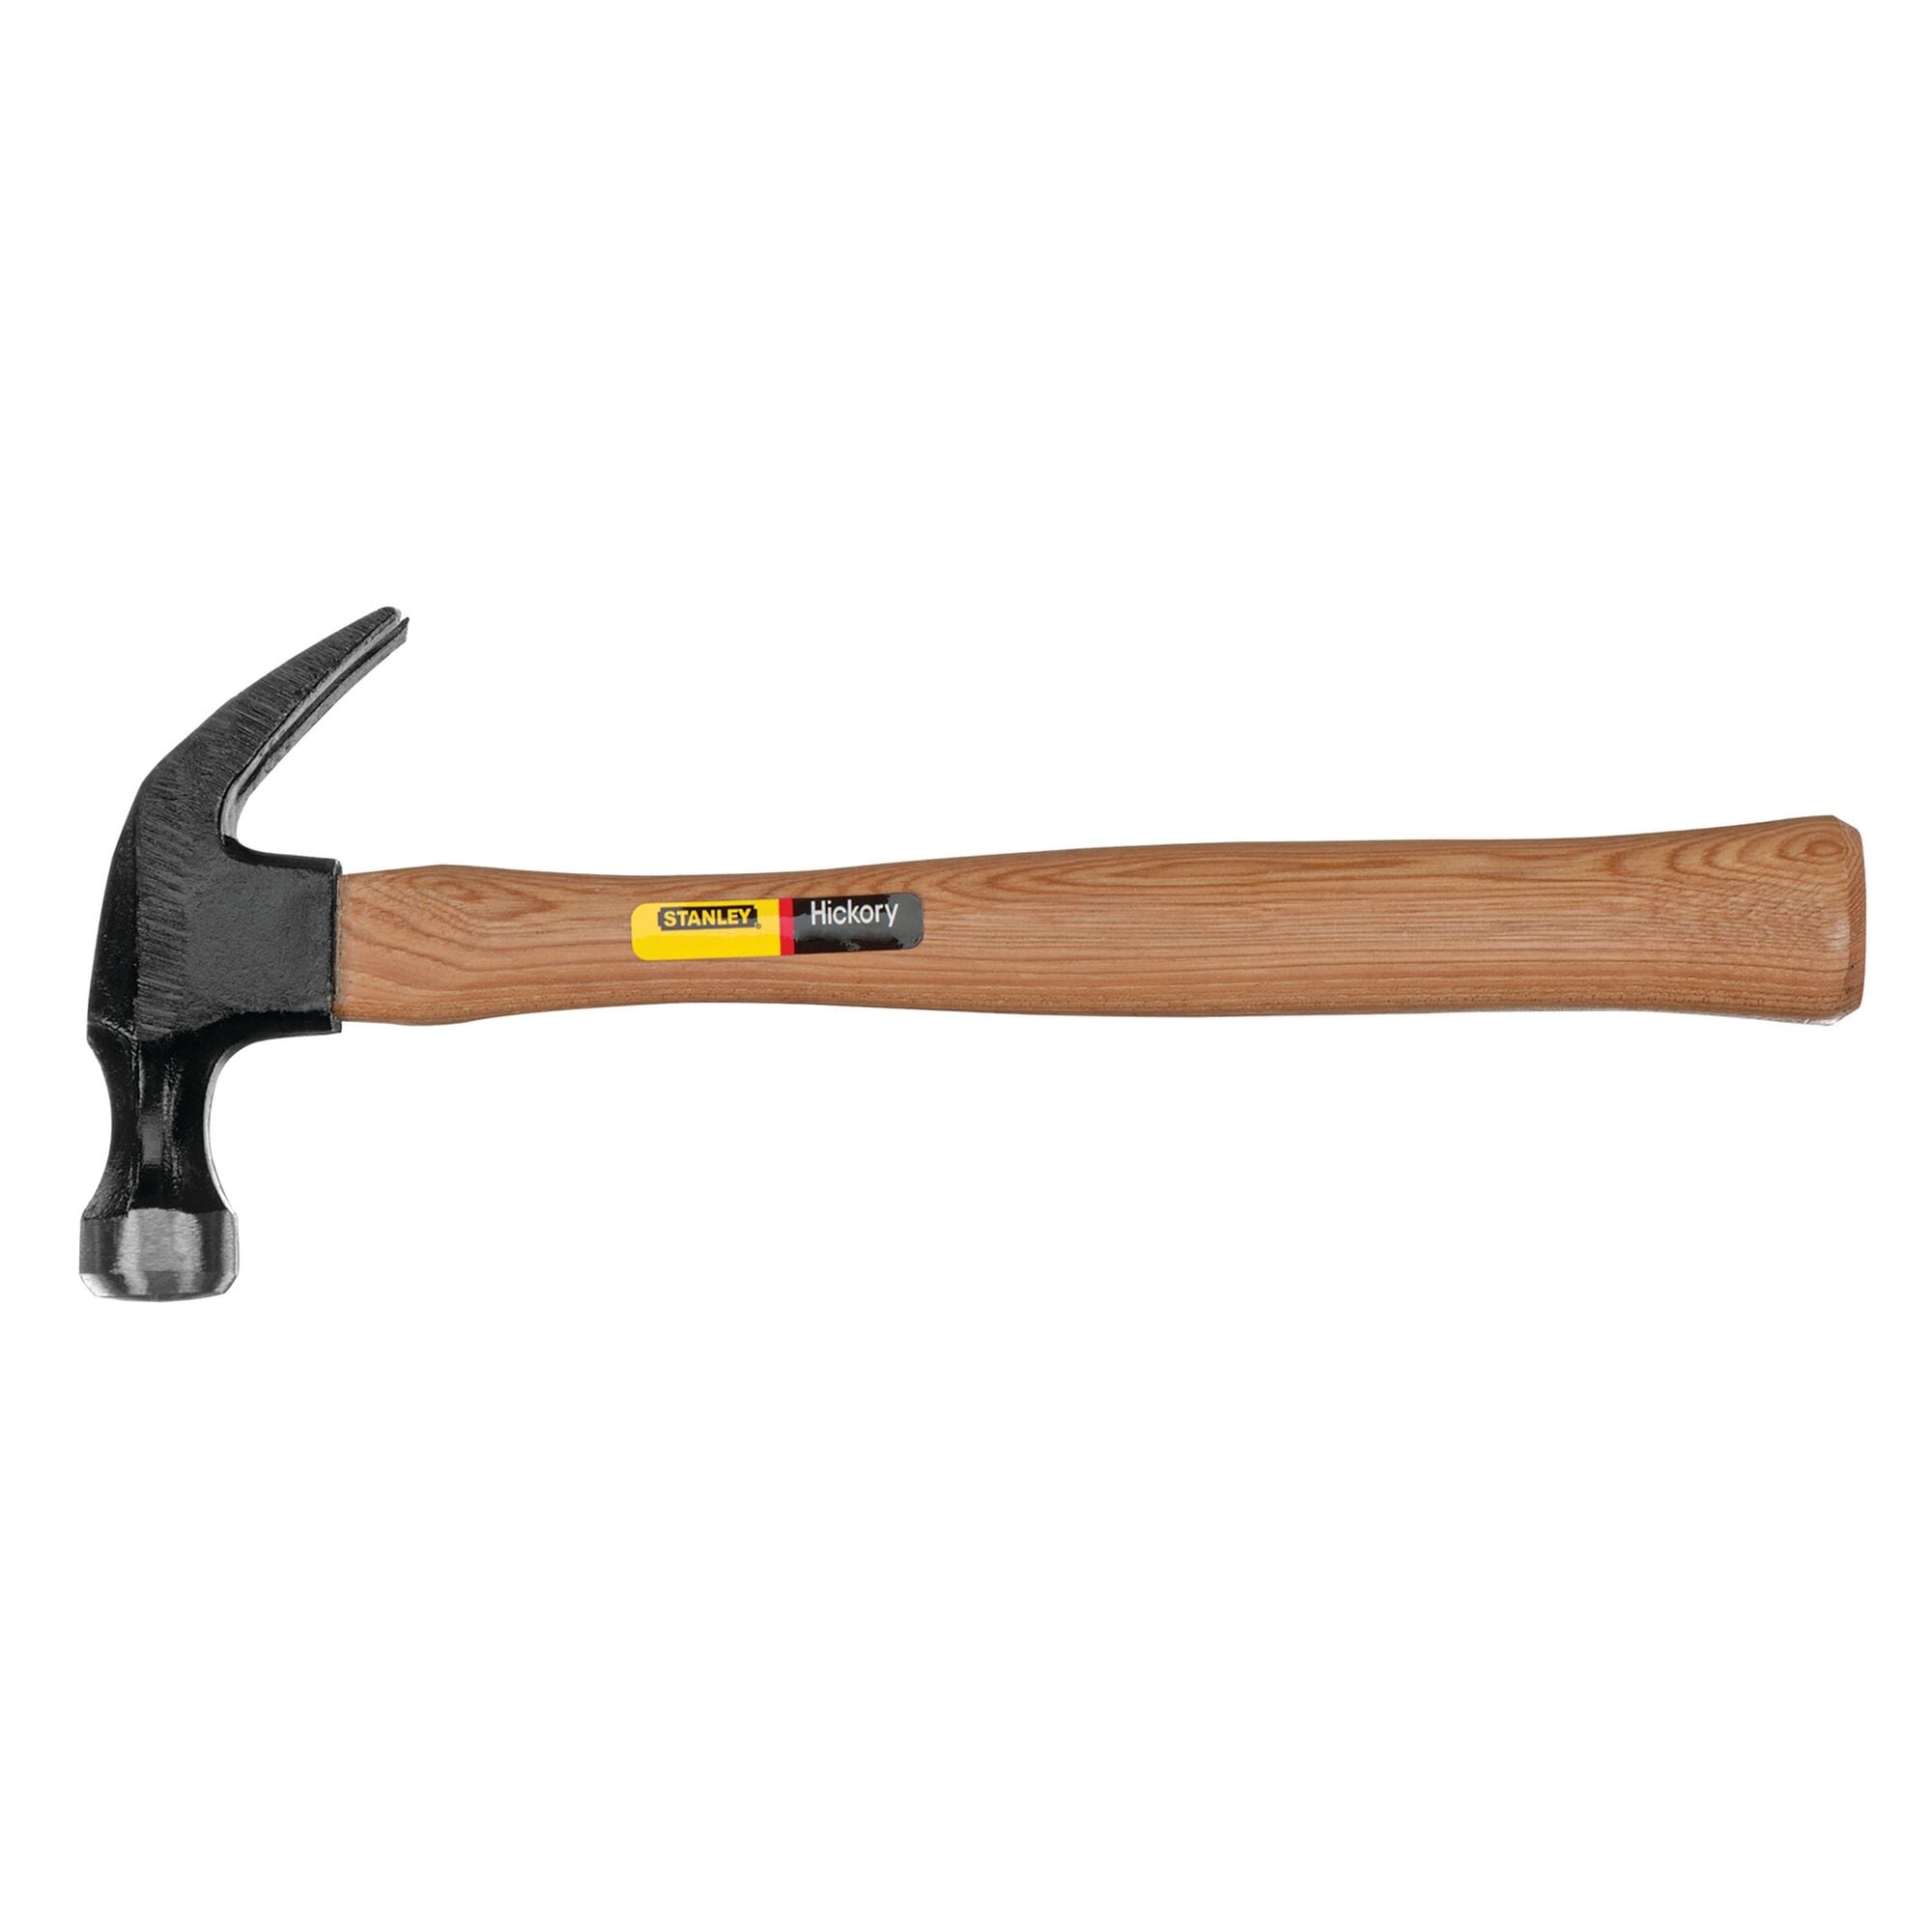 7 oz Curved Claw Wood Handle Nailing Hammer | STANLEY